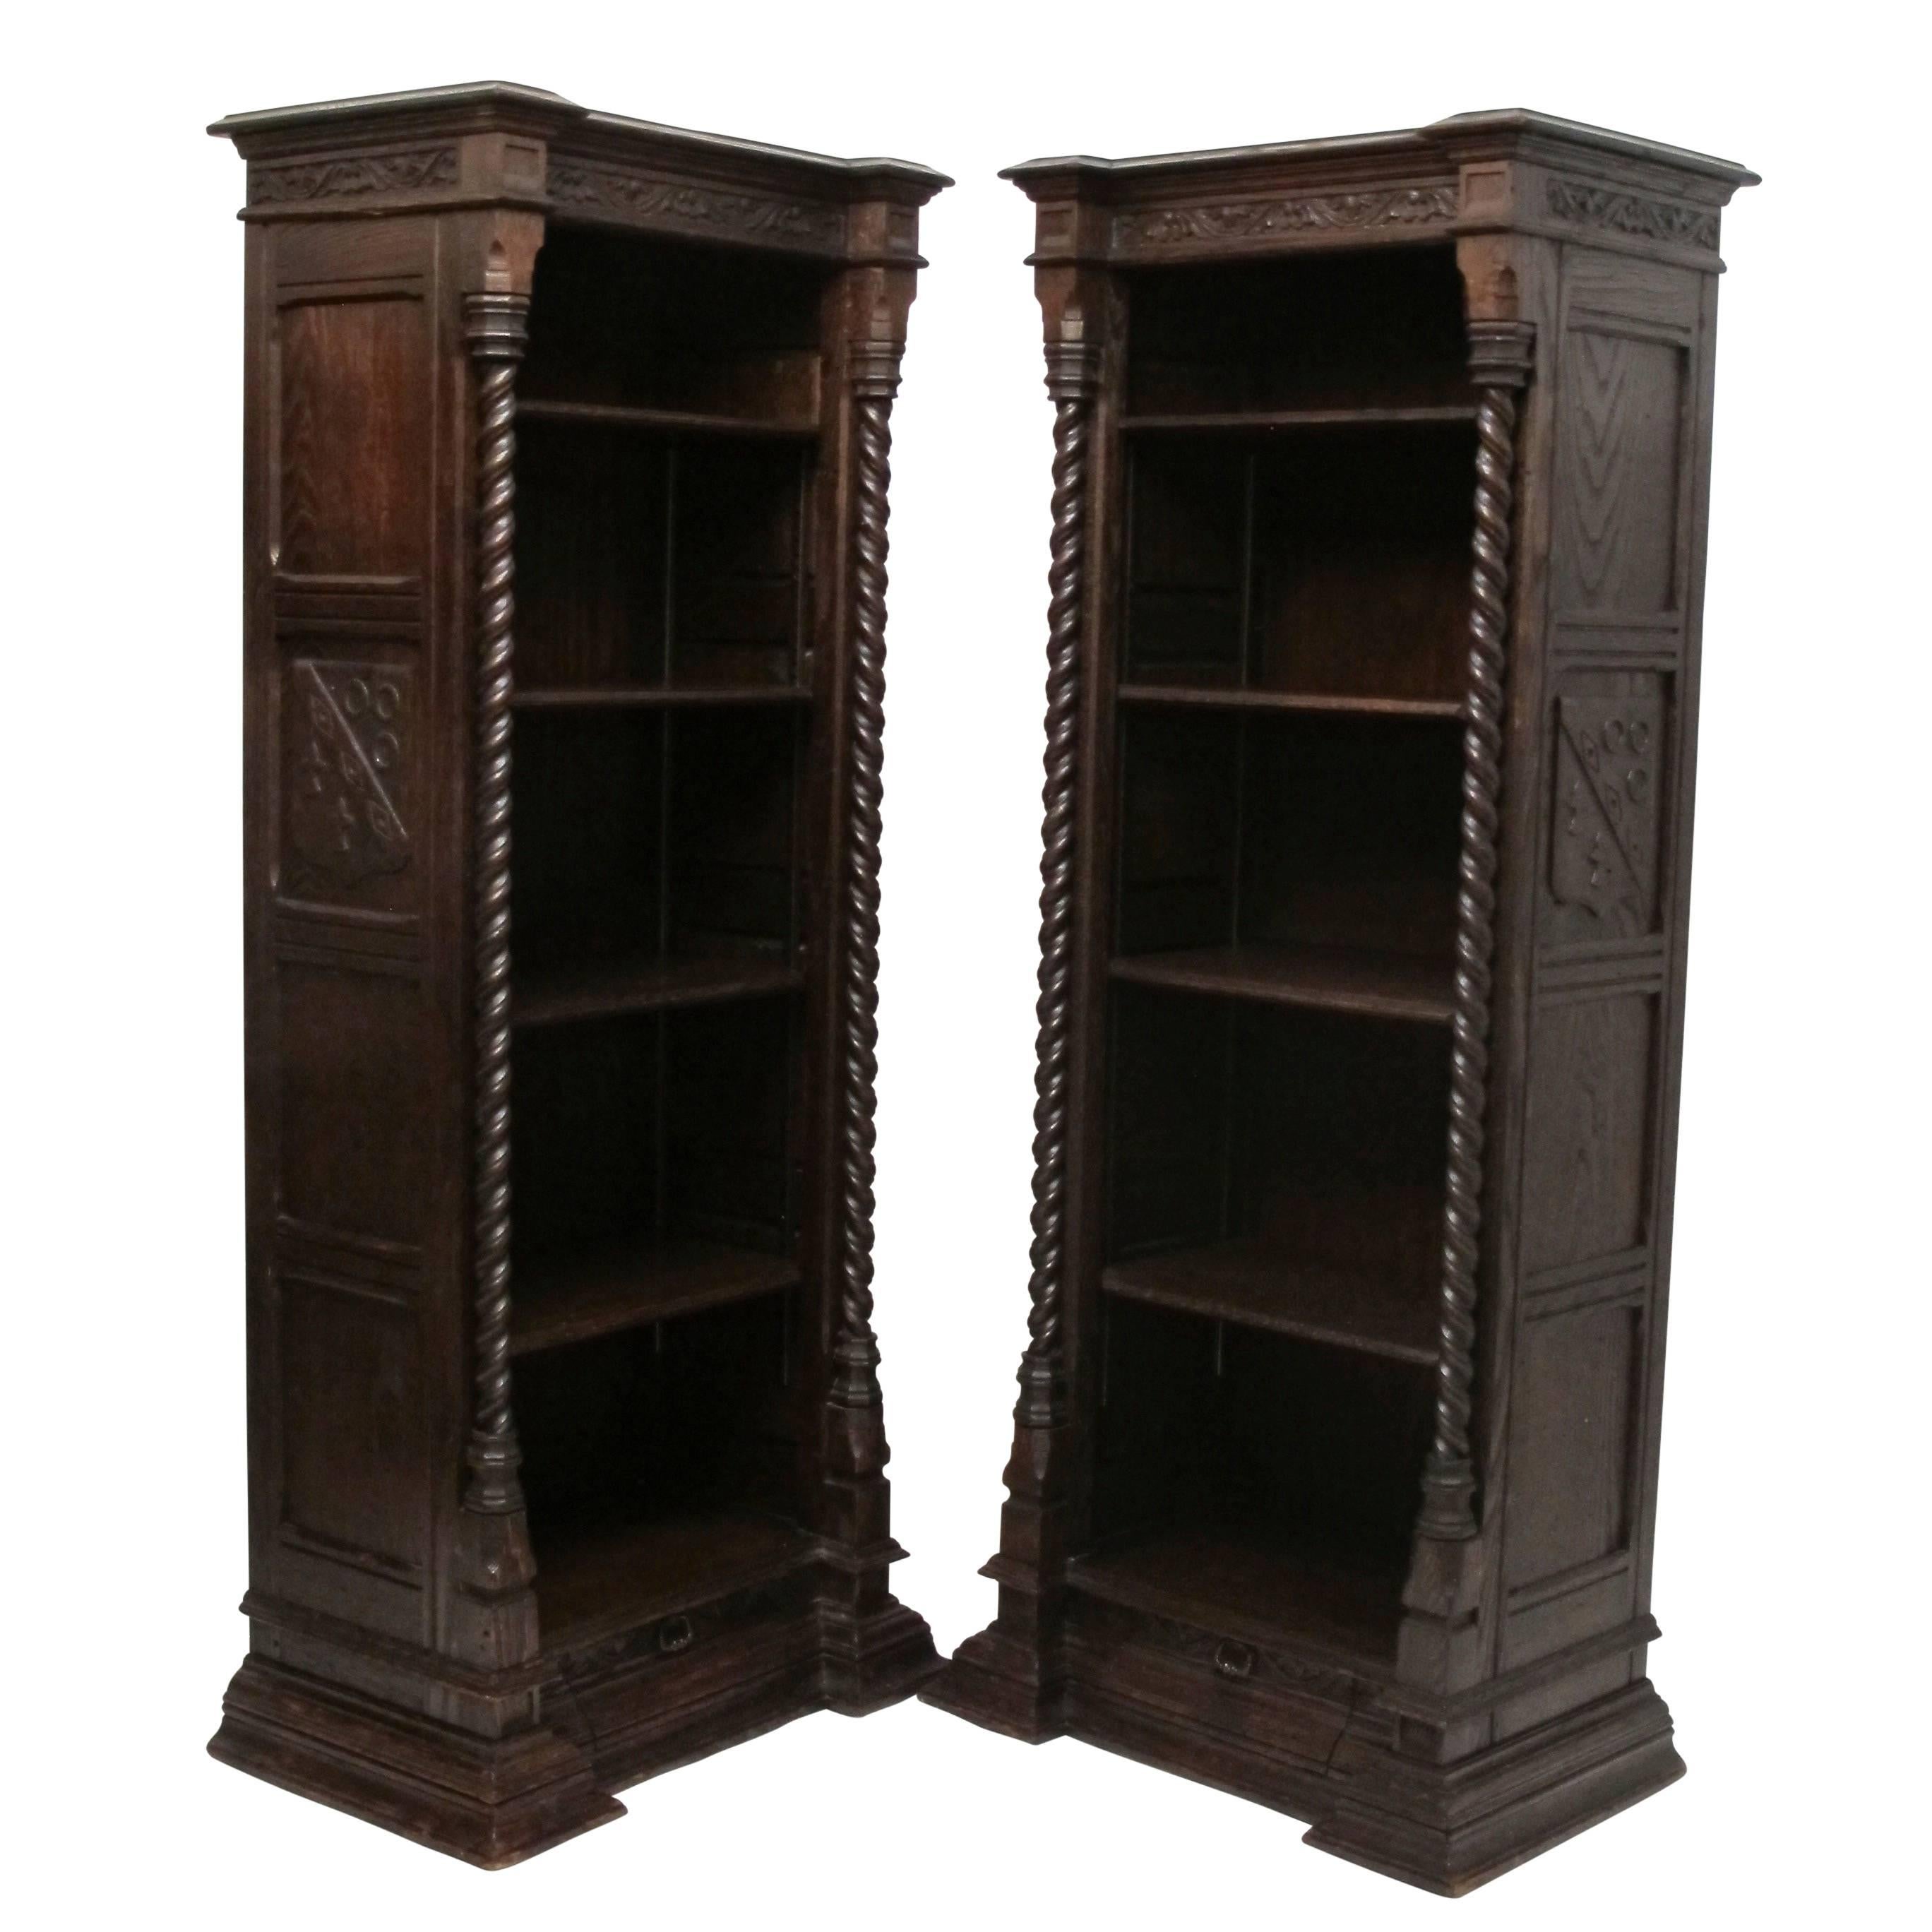 A pair of solid oak Spanish Revival bookcases with four adjustable shelves. Having a single drawer in the base of the moulding, shelves flanked by a pair of twisted columns, and with carved sides and carving around the top apron. American, first